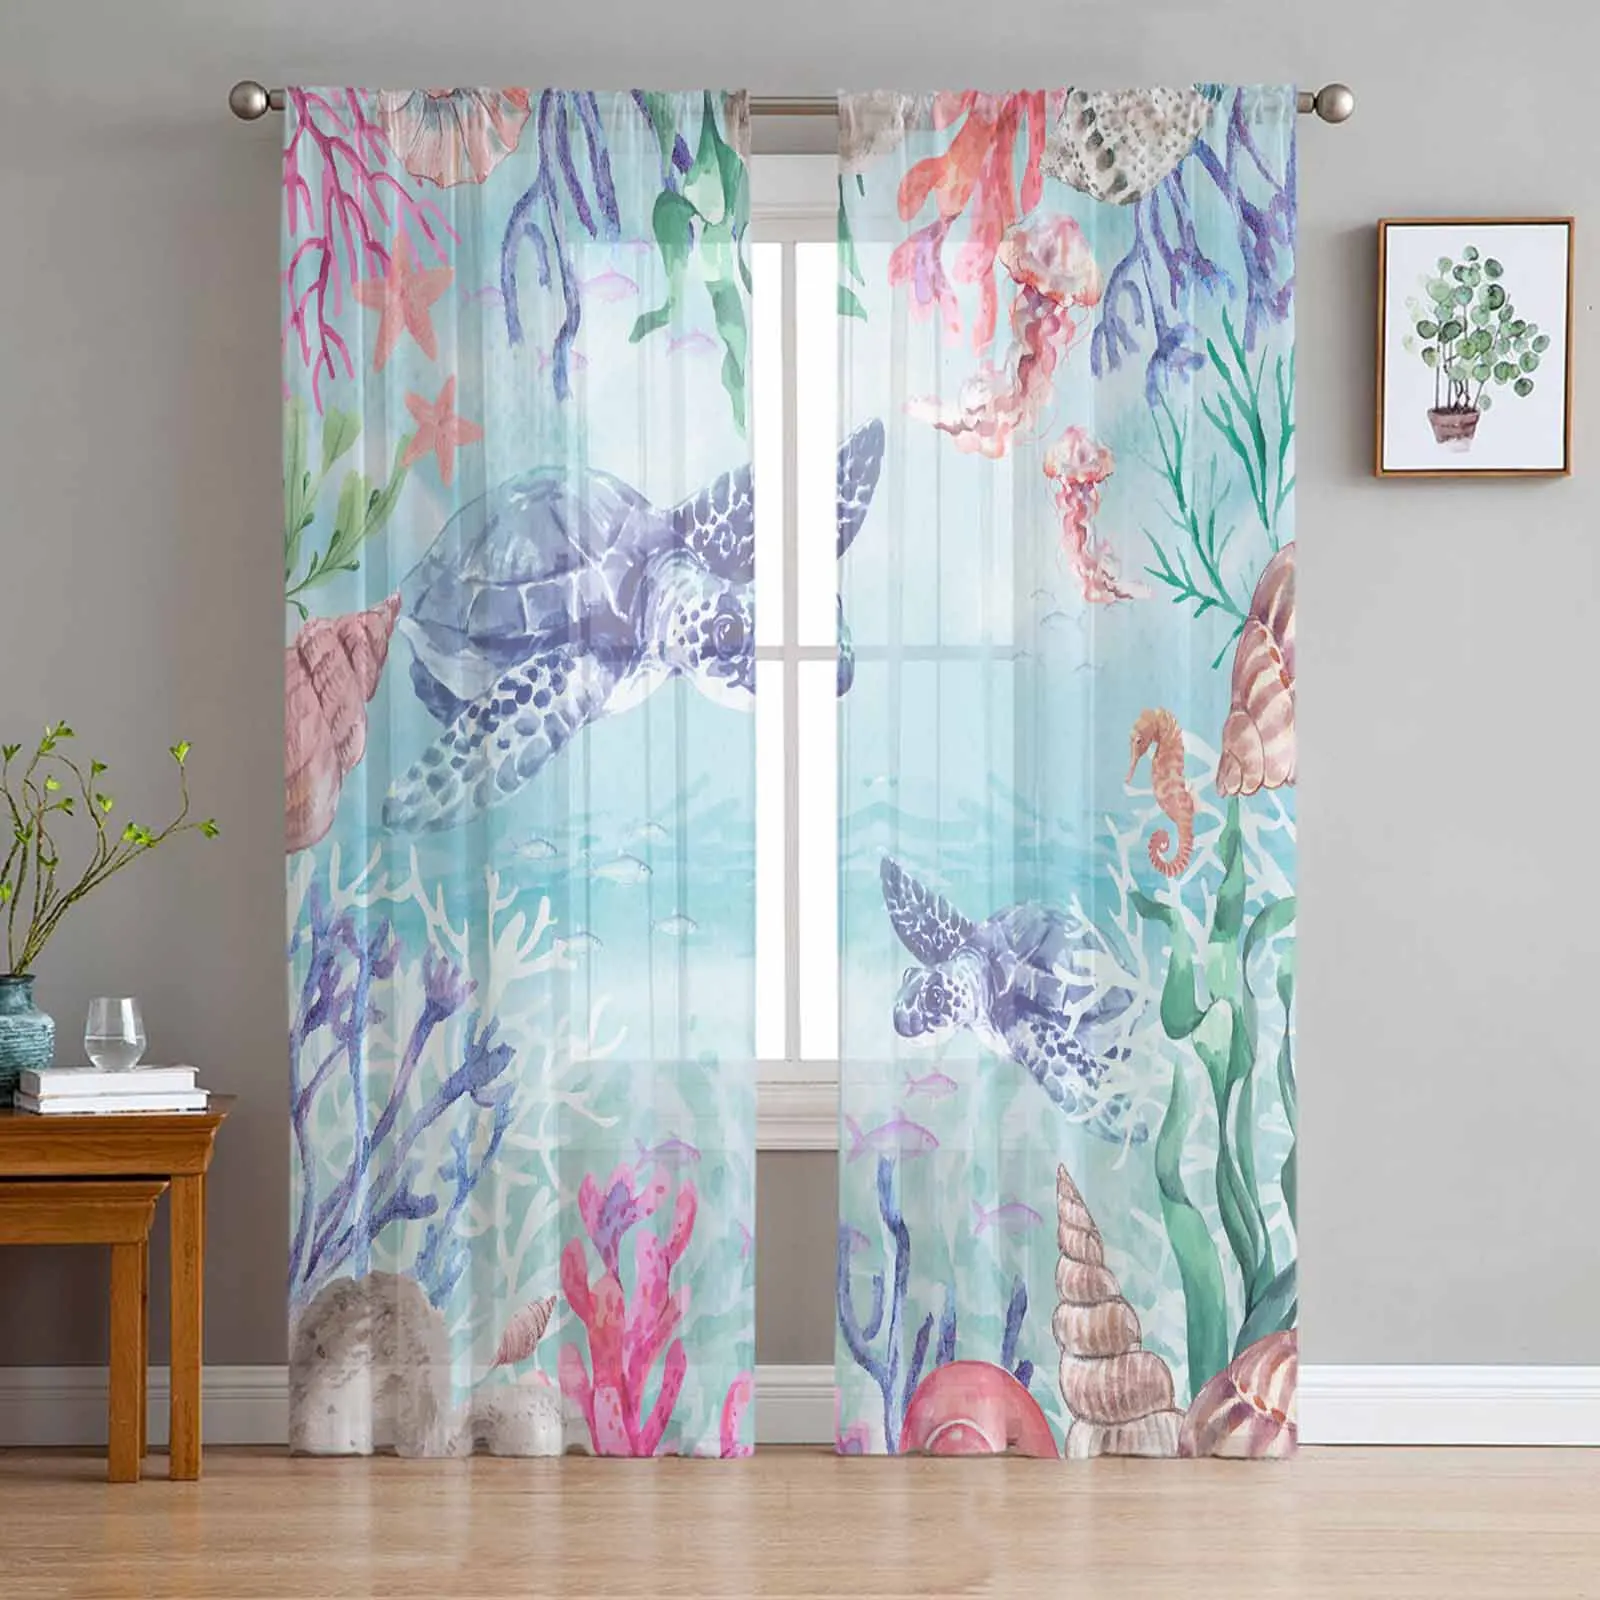 

Ocean Coral Starfish Watercolor Tulle Curtains for Living Room Sheer Curtain for Bedroom Kitchen Blinds Voile Curtains